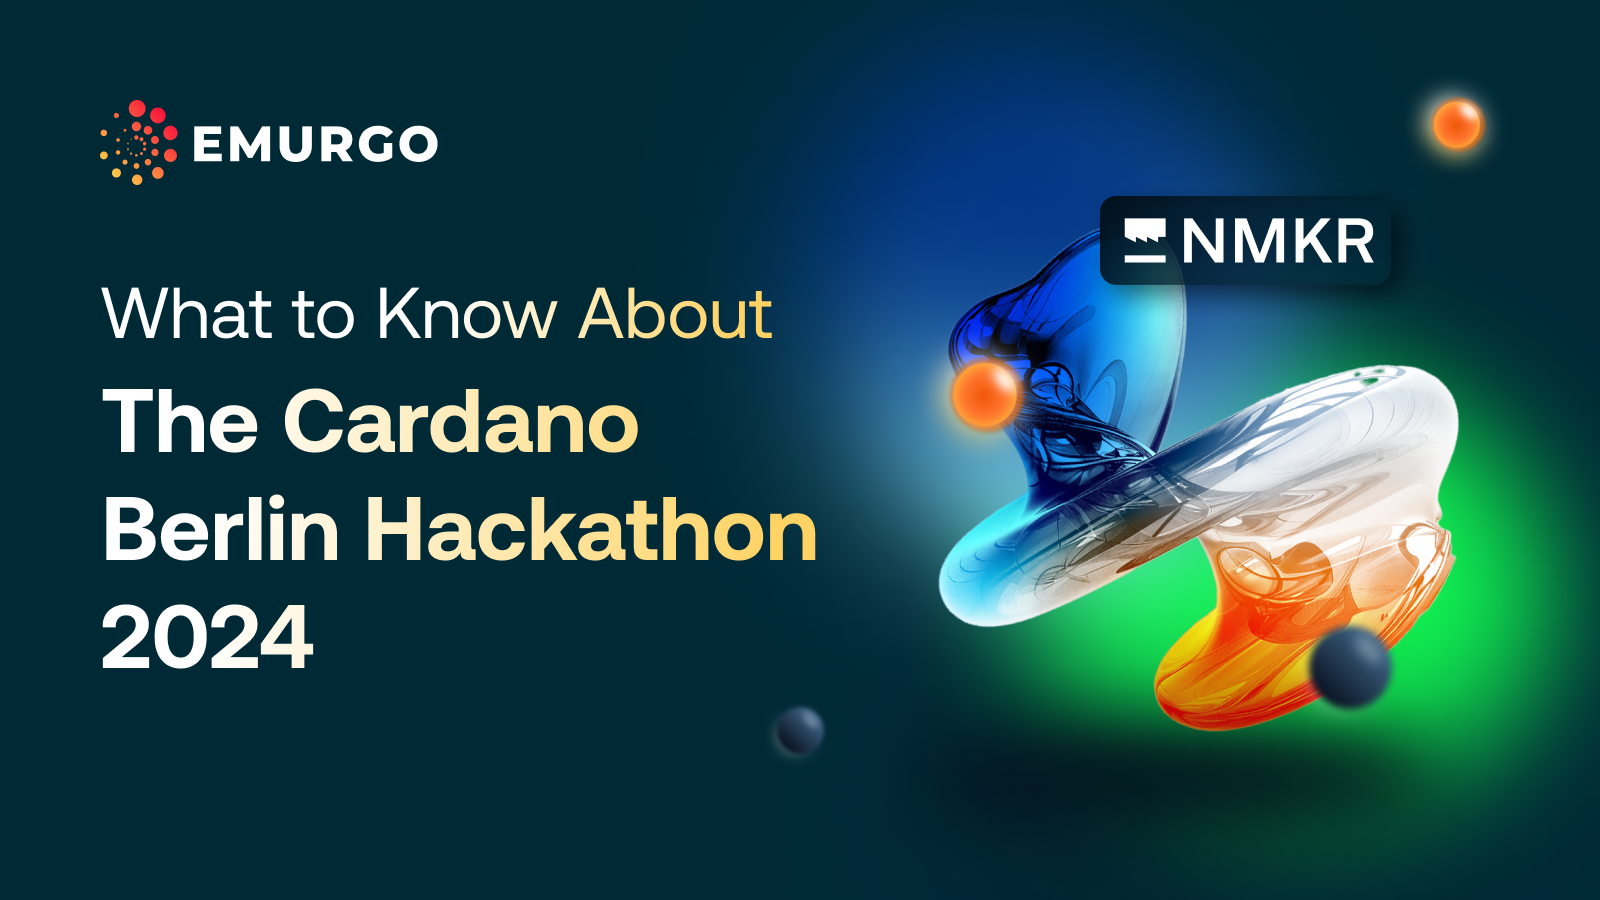 What to Know About The Cardano Berlin Hackathon 2024